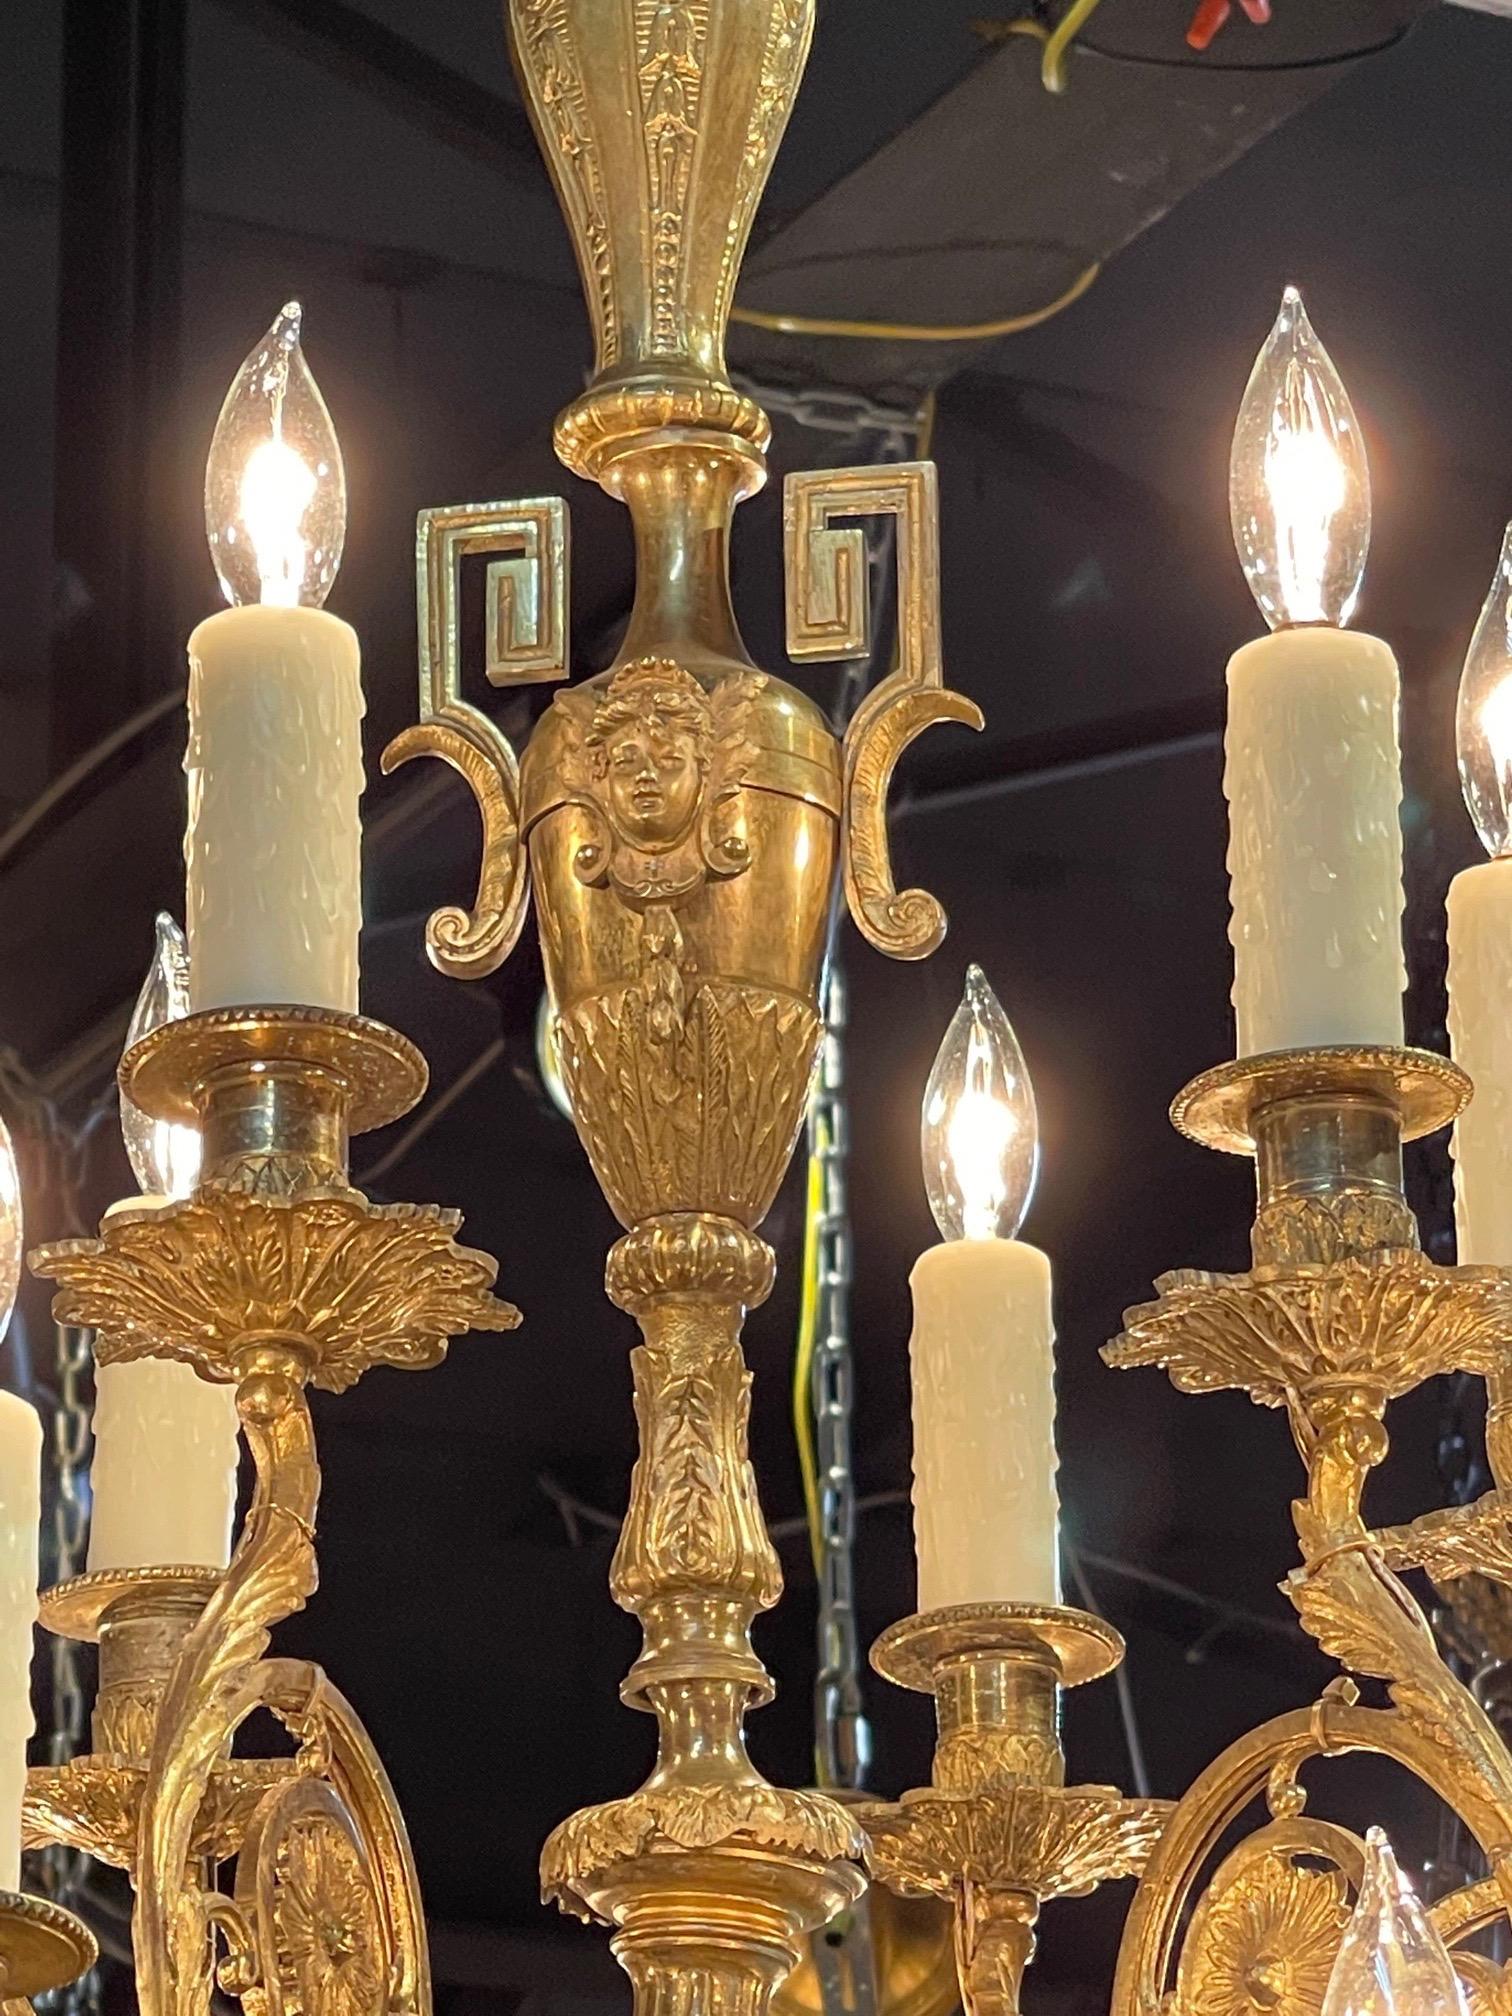 Beautiful decorative 19th century French gilt bronze 18-light chandelier. Lovely scrolling gilt metal along with interesting images of faces. This fixture also has multiple layers of lights. Gorgeous!